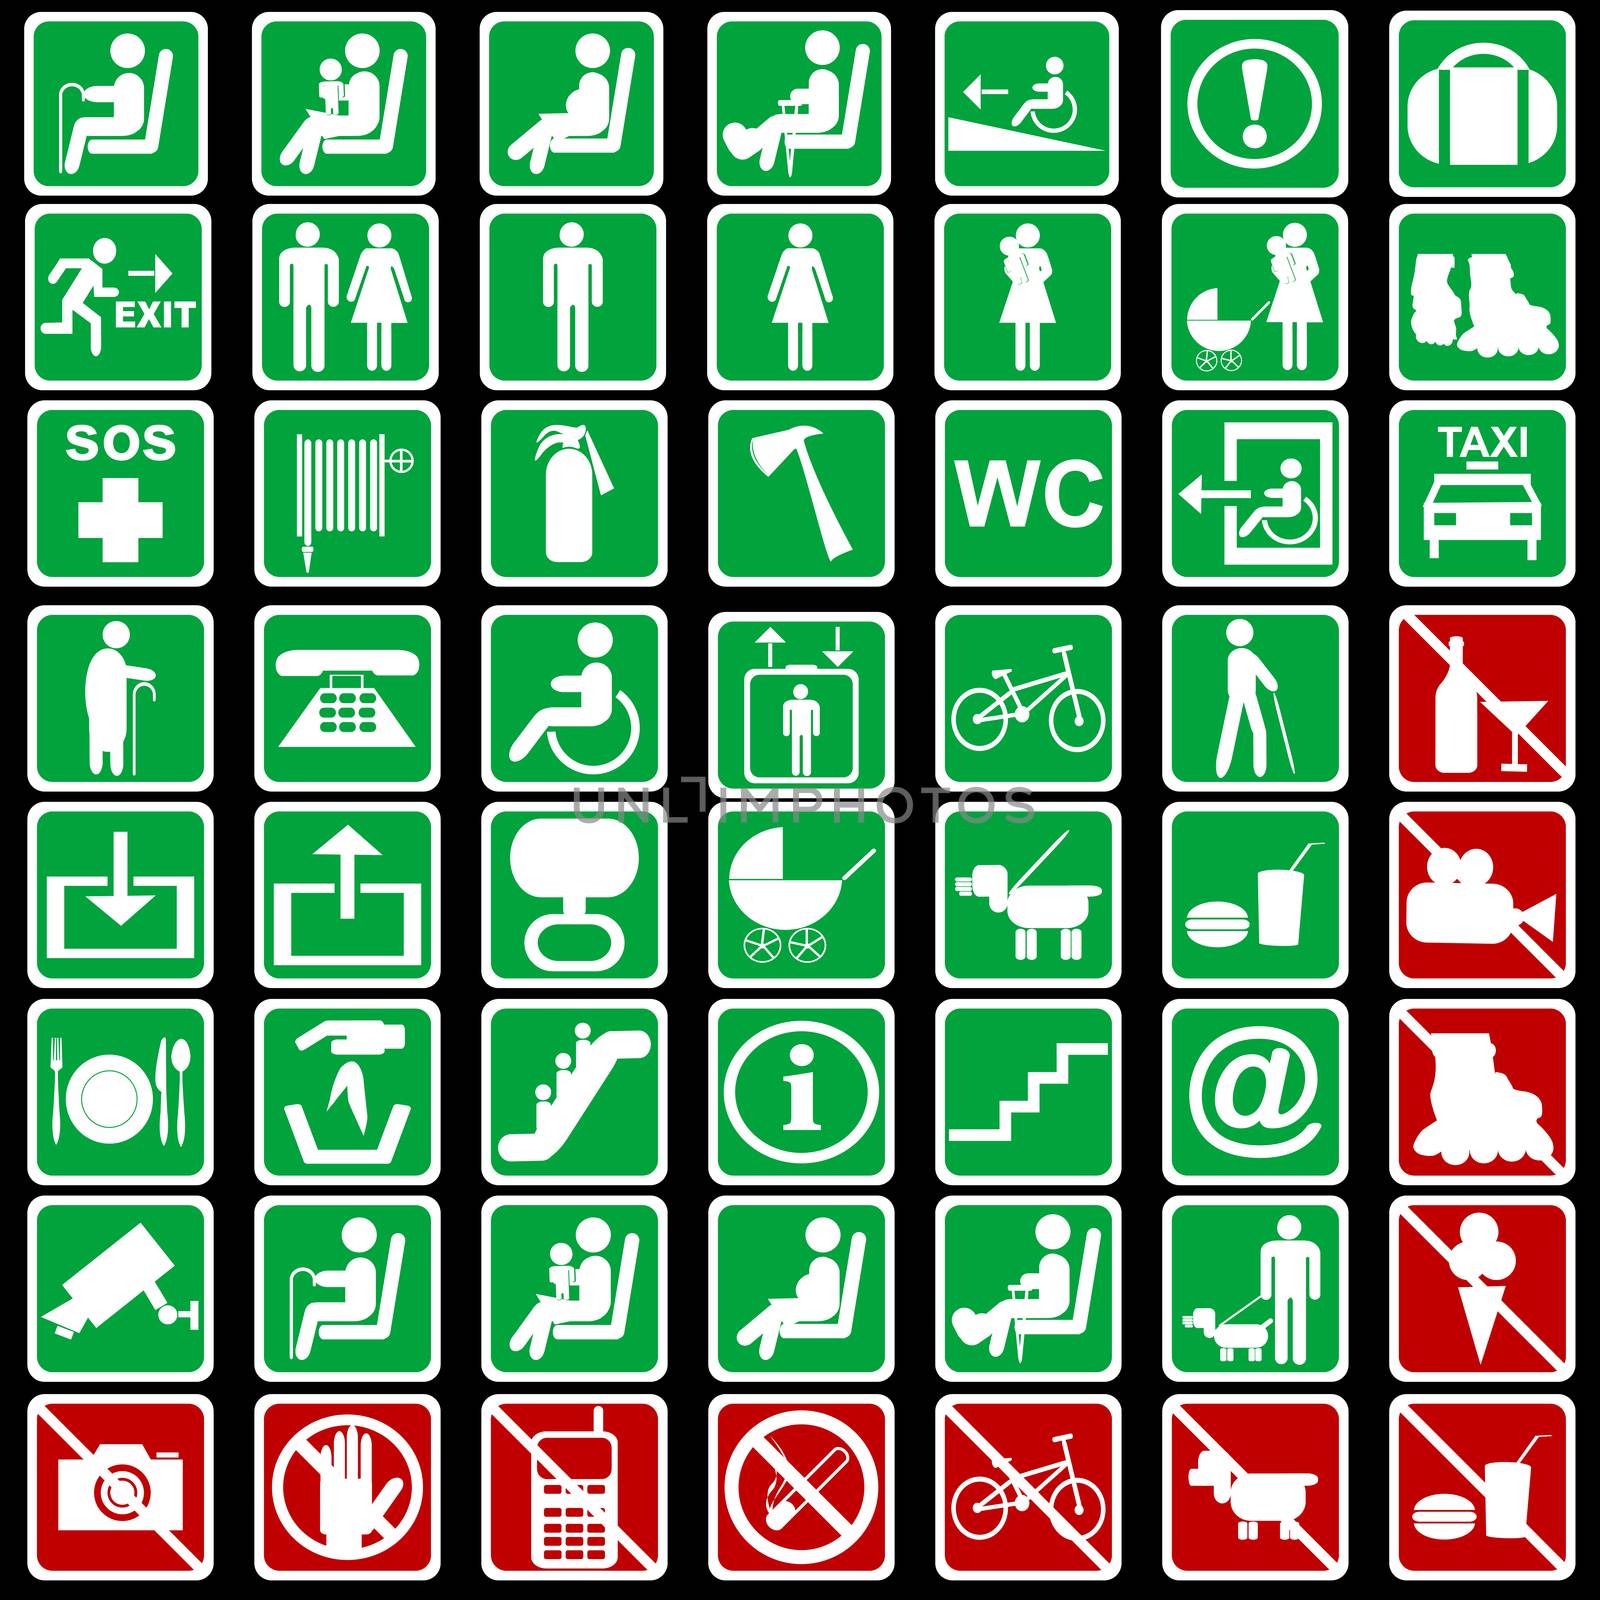 Set of international signs used in transportation means